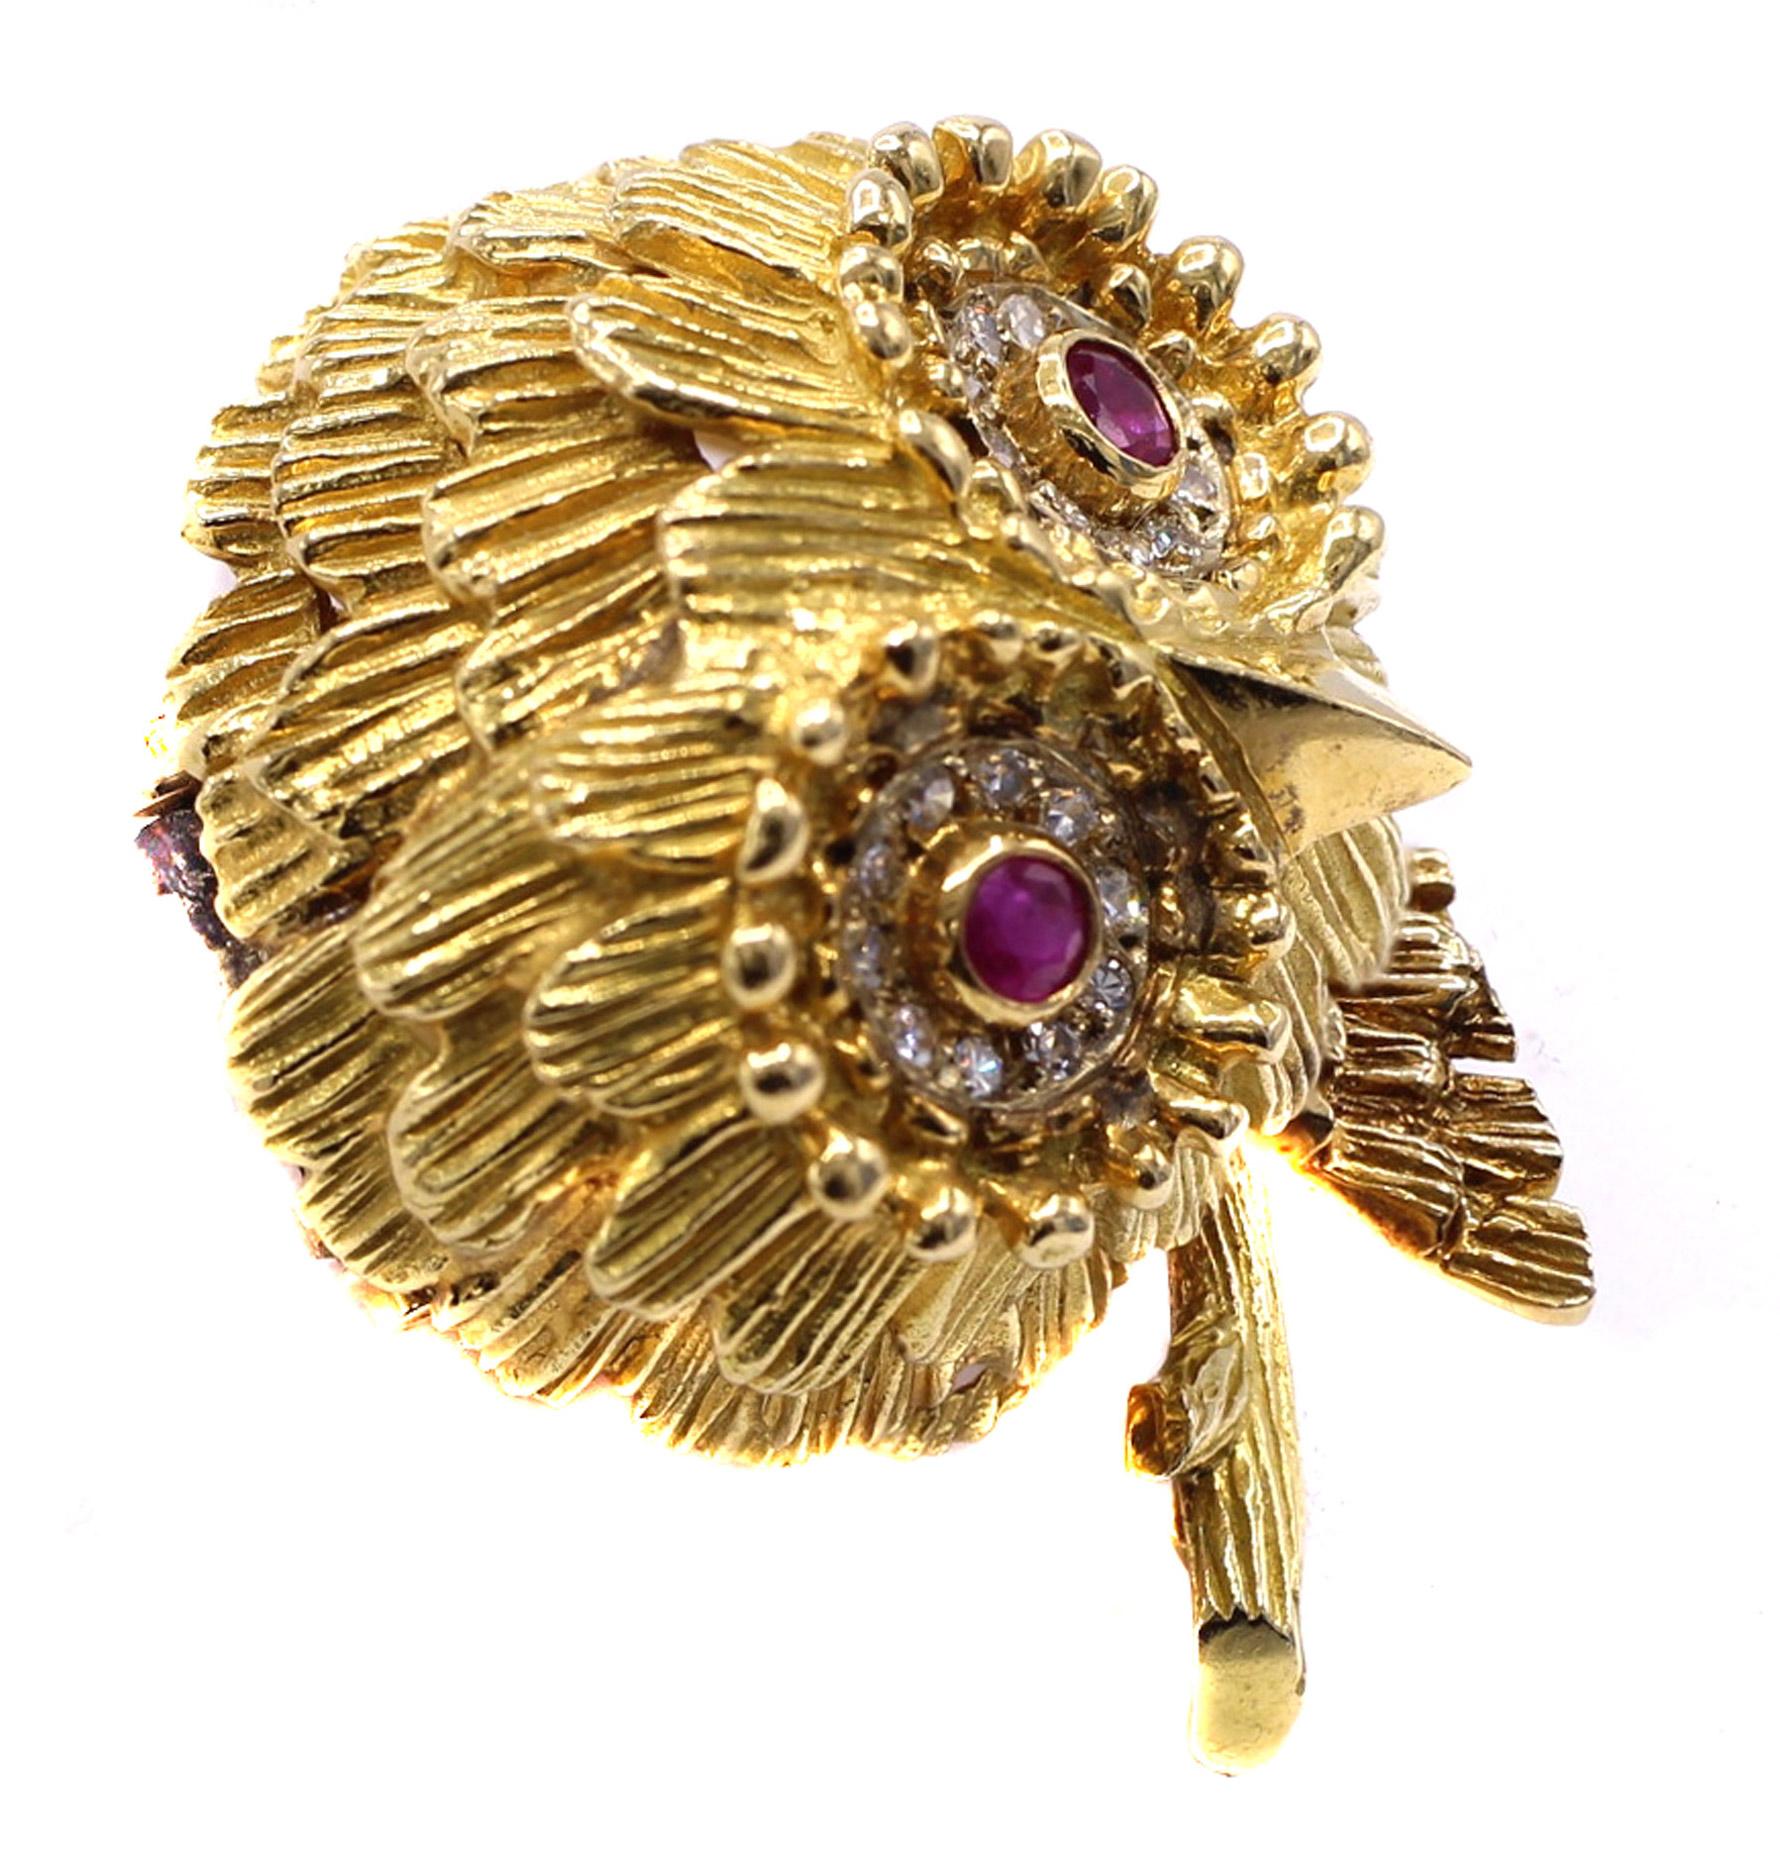 Beautifully designed and masterfully handcrafted this whimsical owl brooch is a pure joy to look at. Extremely detailed and worked in 18 karat yellow gold, each section of feathers is finely hand engraved in layers as to create a lifelike and three